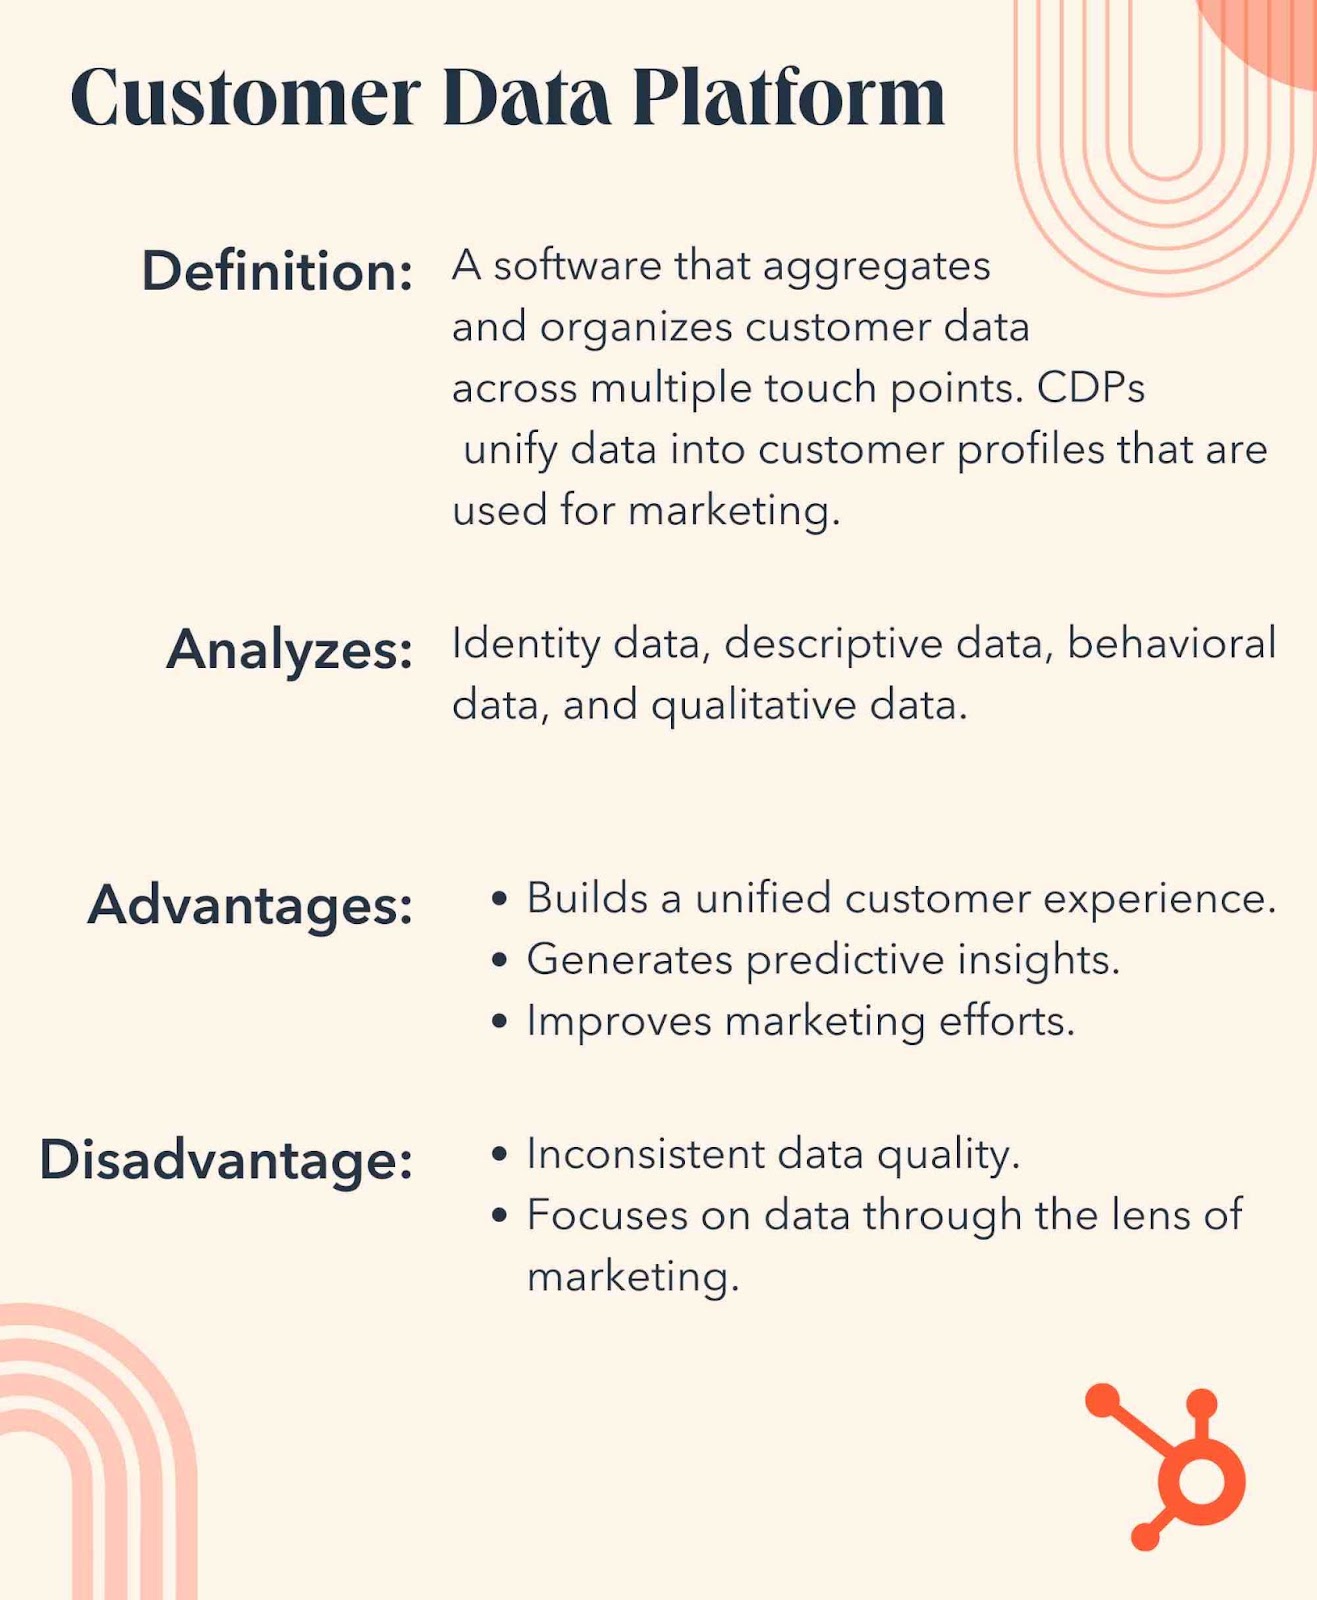 cdp vs mdm. Customer Data Management. Definition, a software that aggregates and organizes customer data. Analyzes, identity, descriptive, behavioral, and qualitative data. Advantages, business a unified customer experience. Disadvantages, inconsistent data quality.